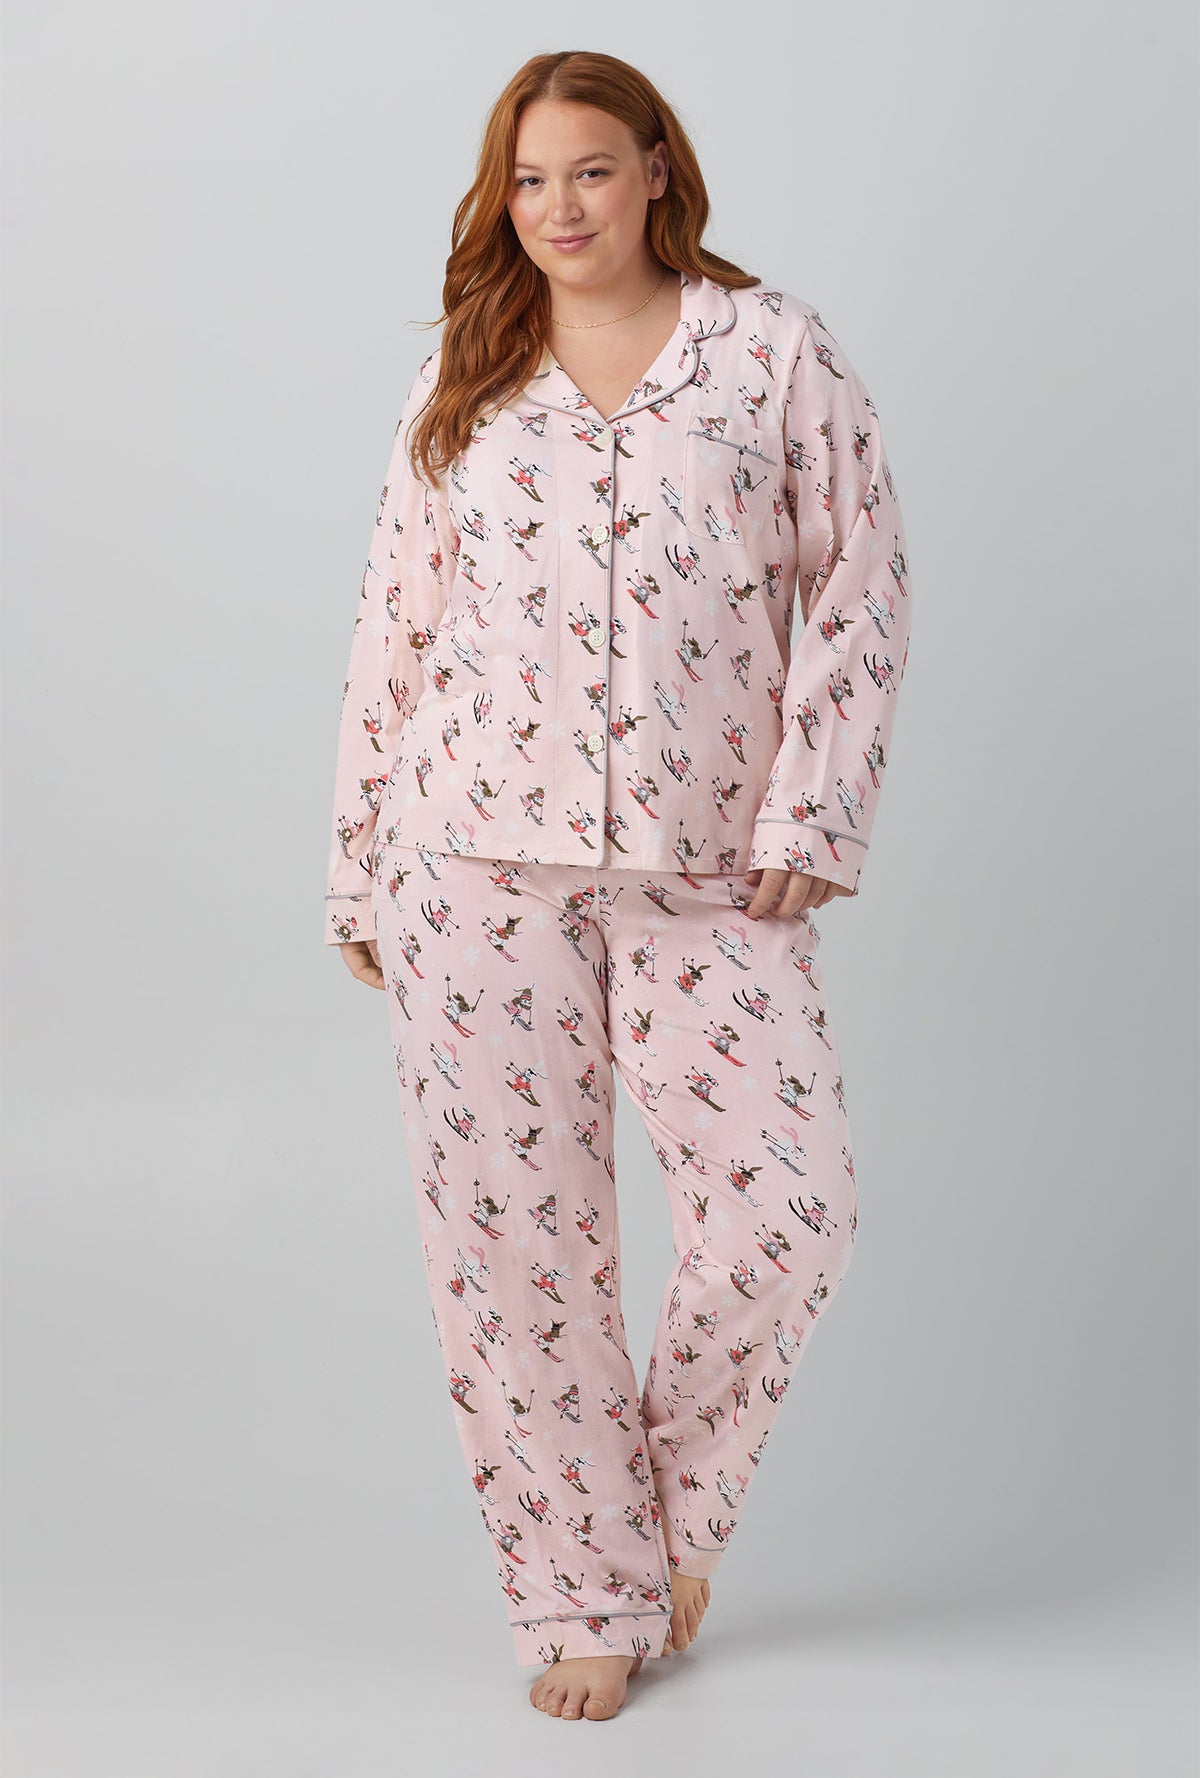 A lady wearing pink long sleeve classic stretch jersey plus pj set with ski bunnies print.